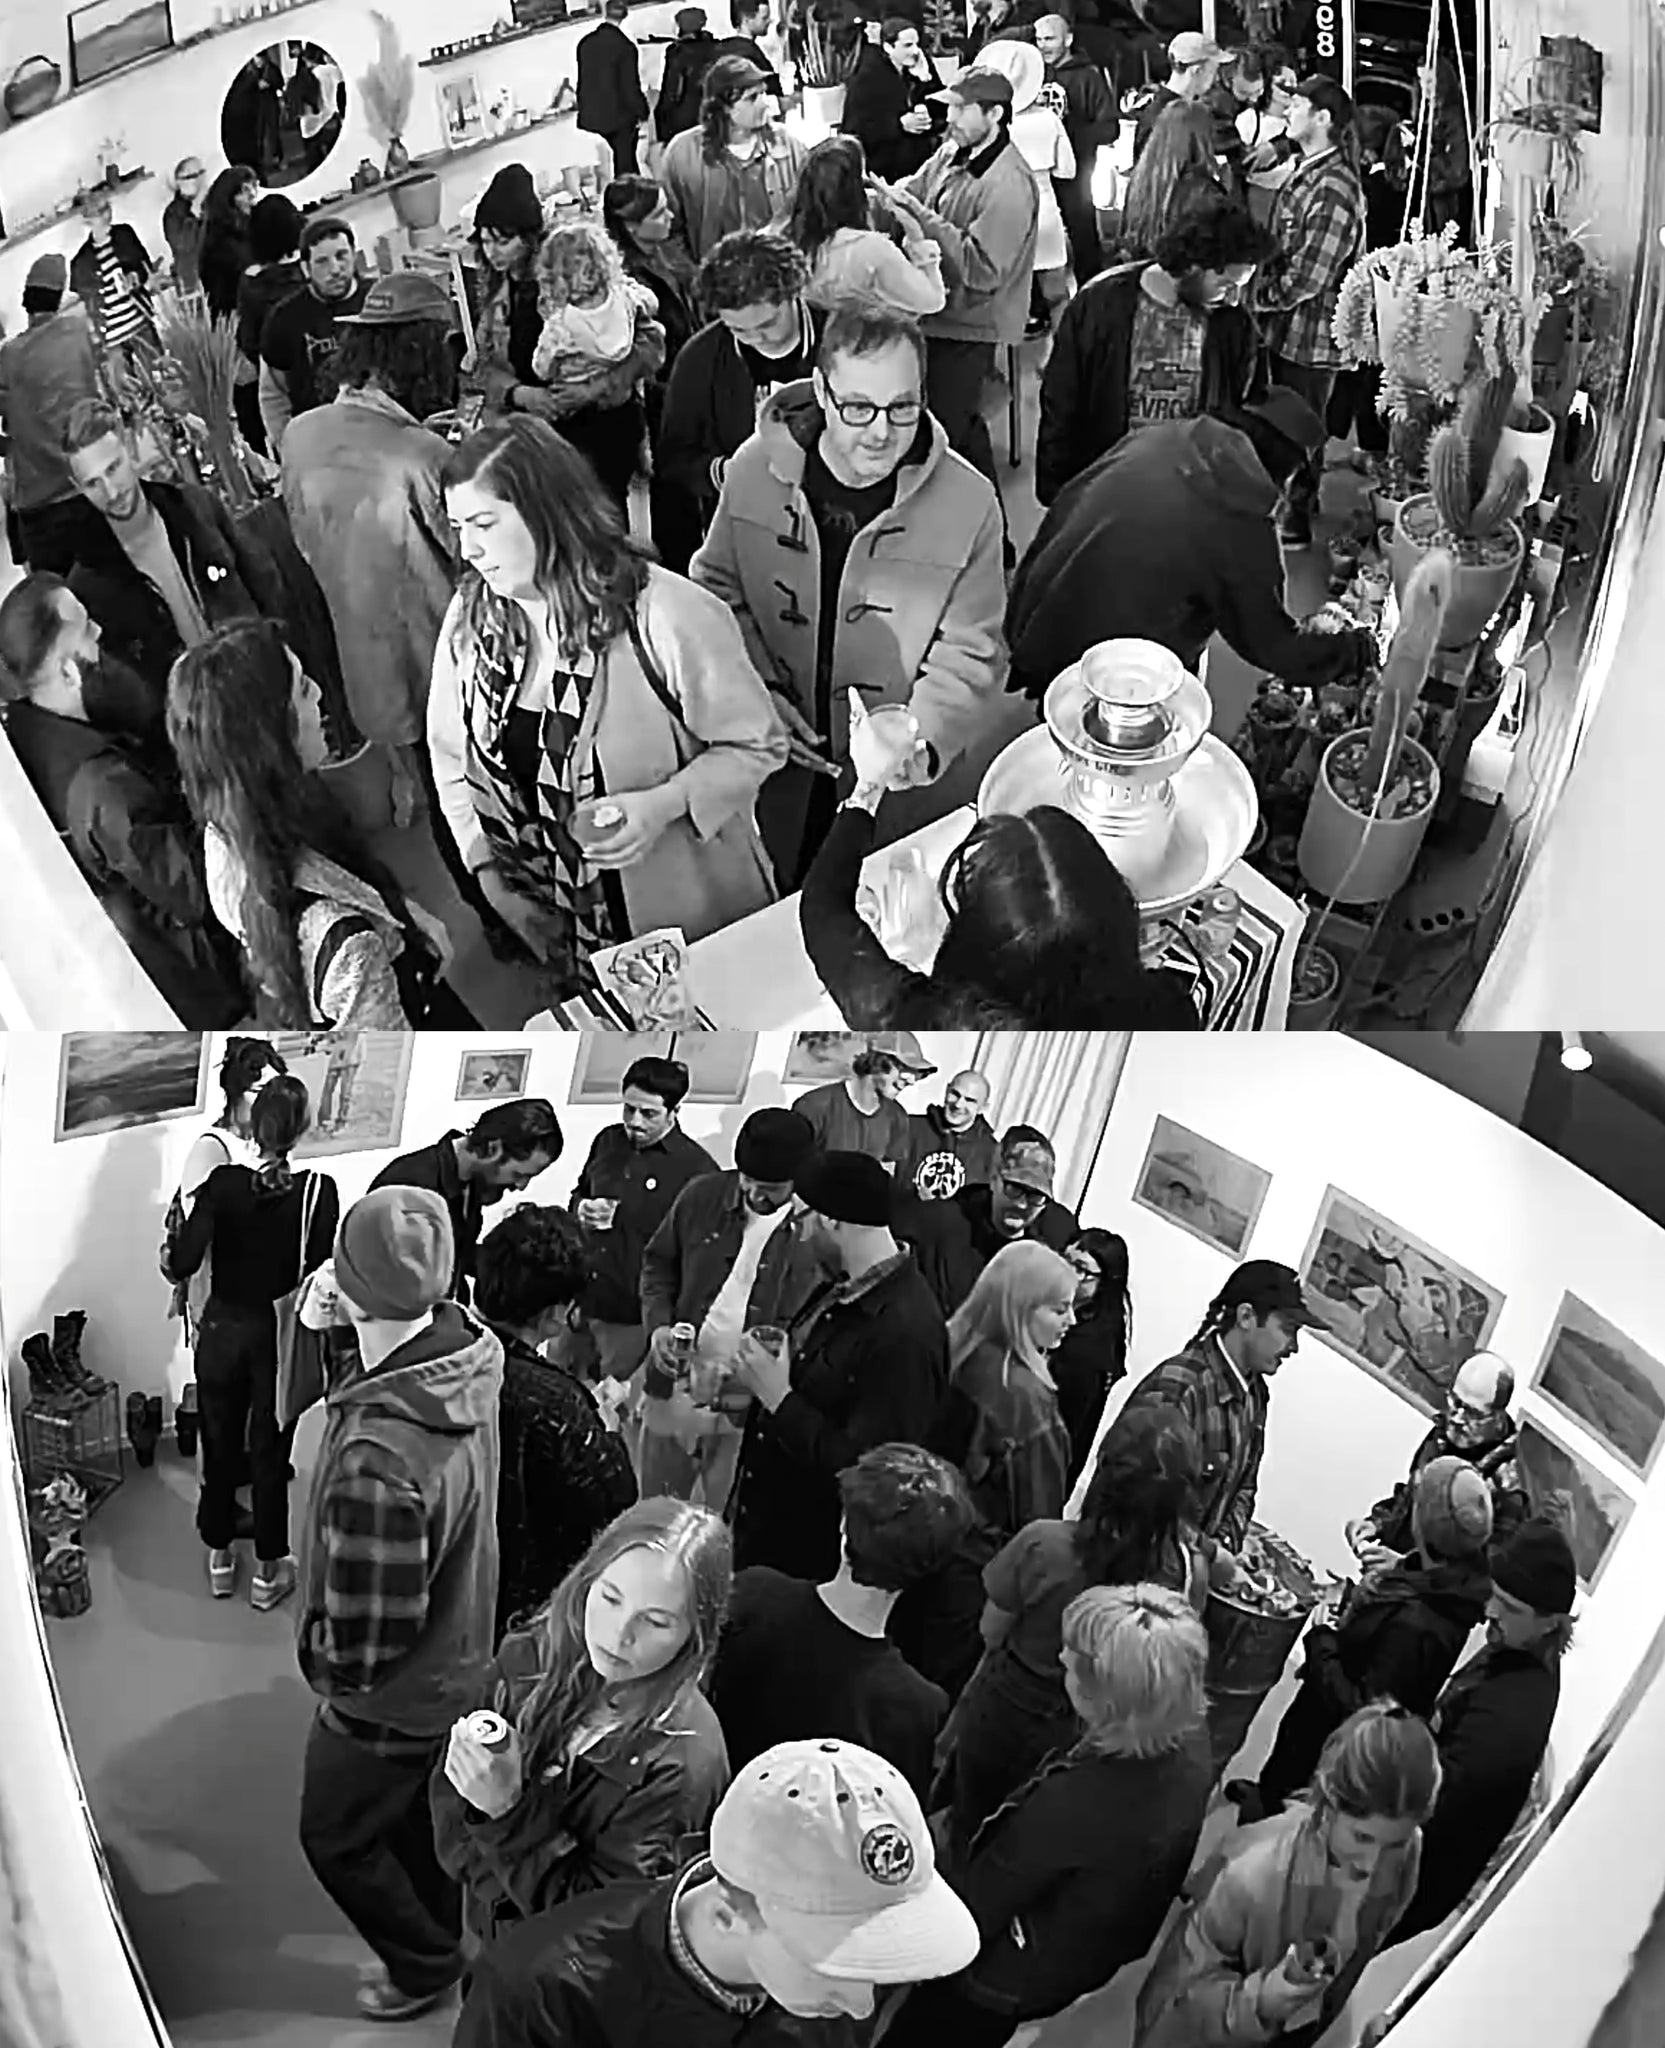 Mike Brodie exhibition turnout